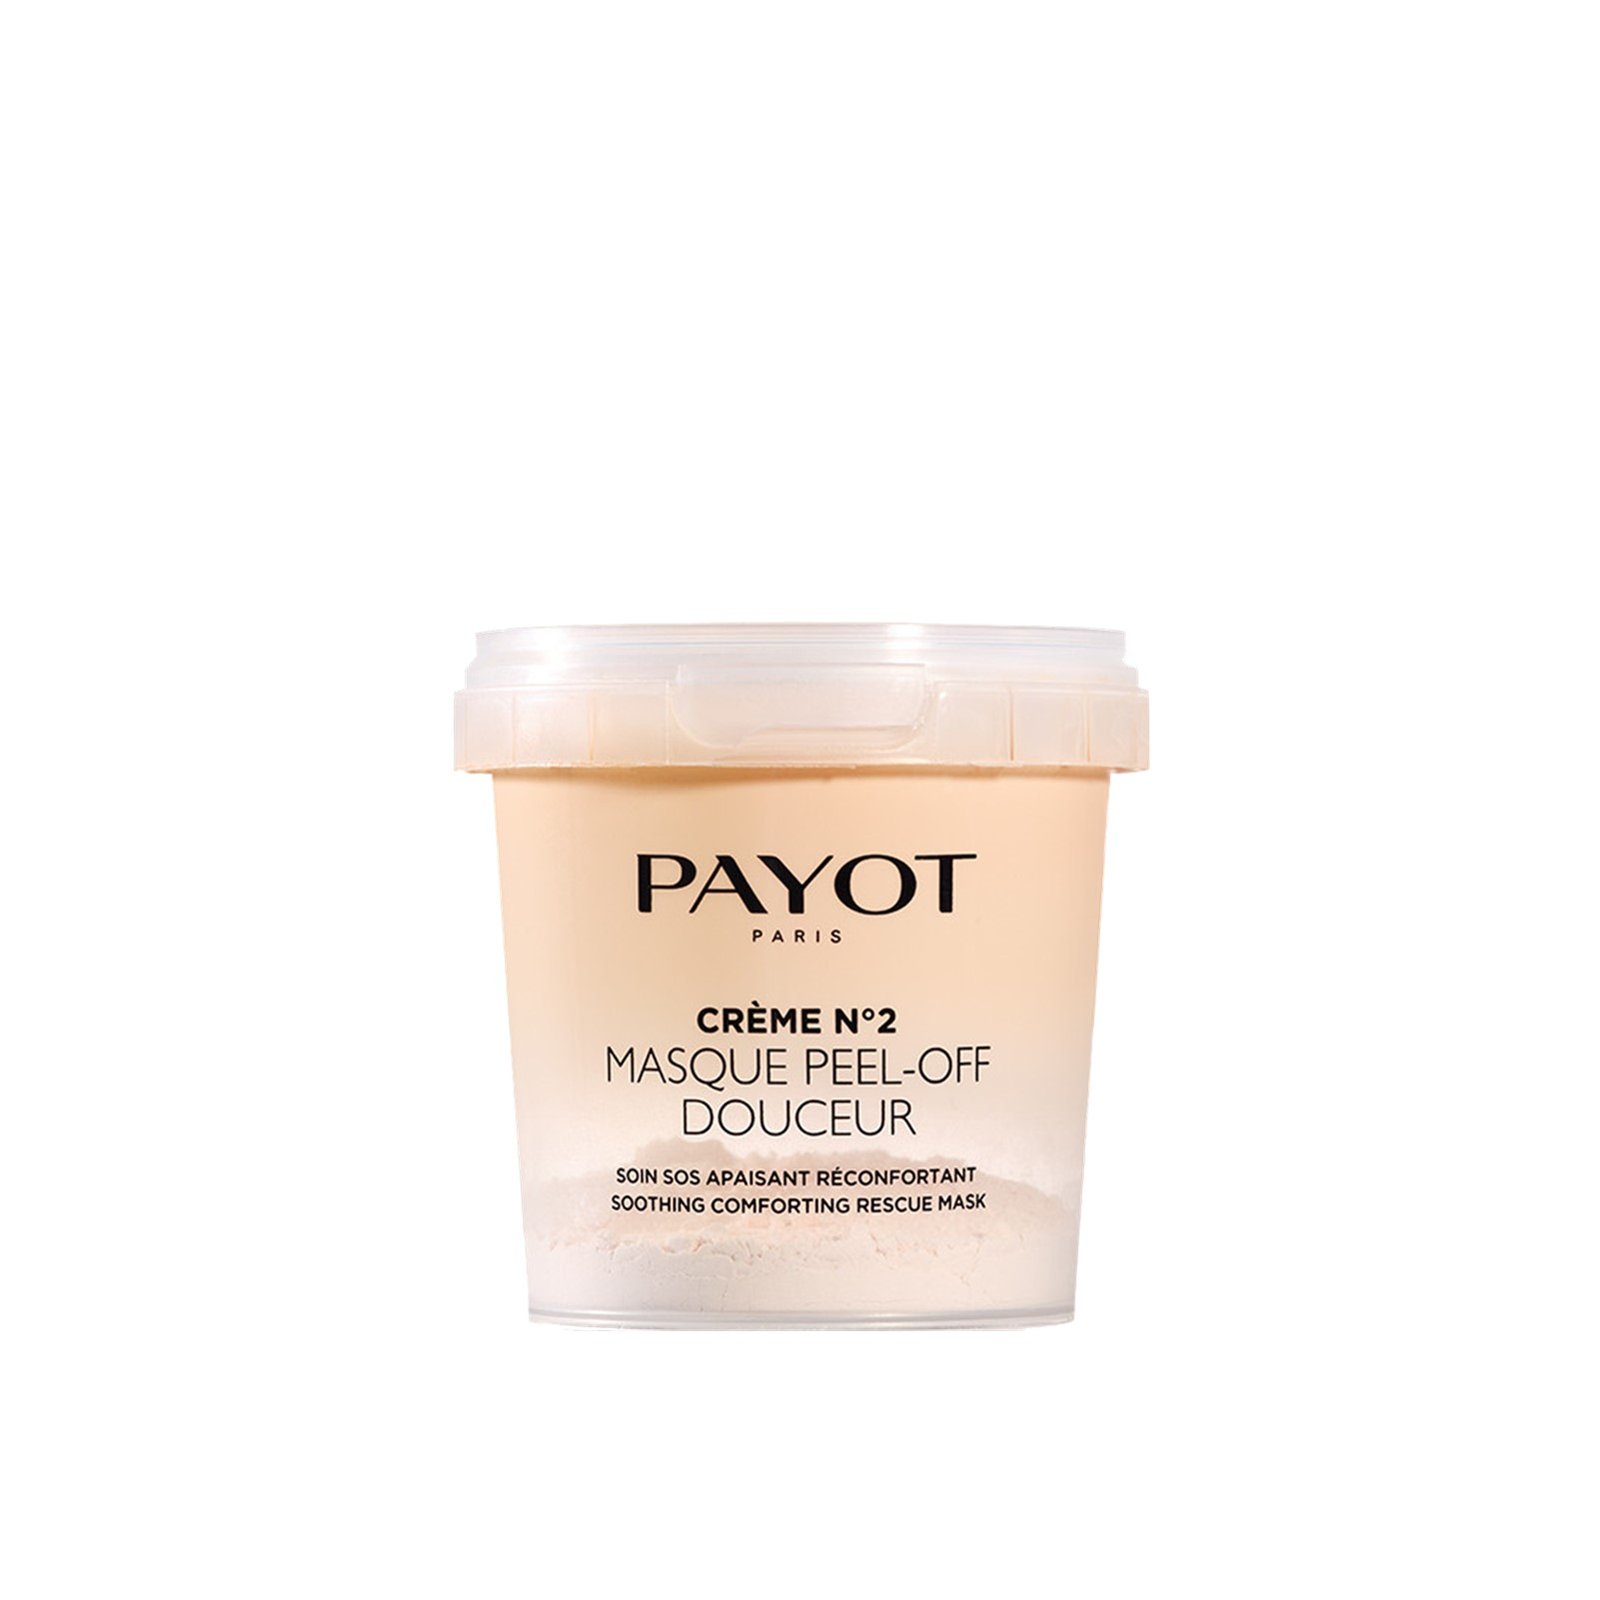 Payot Crème Nº2 Masque Peel-Off Douceur Soothing Comforting Rescue Mask 10g